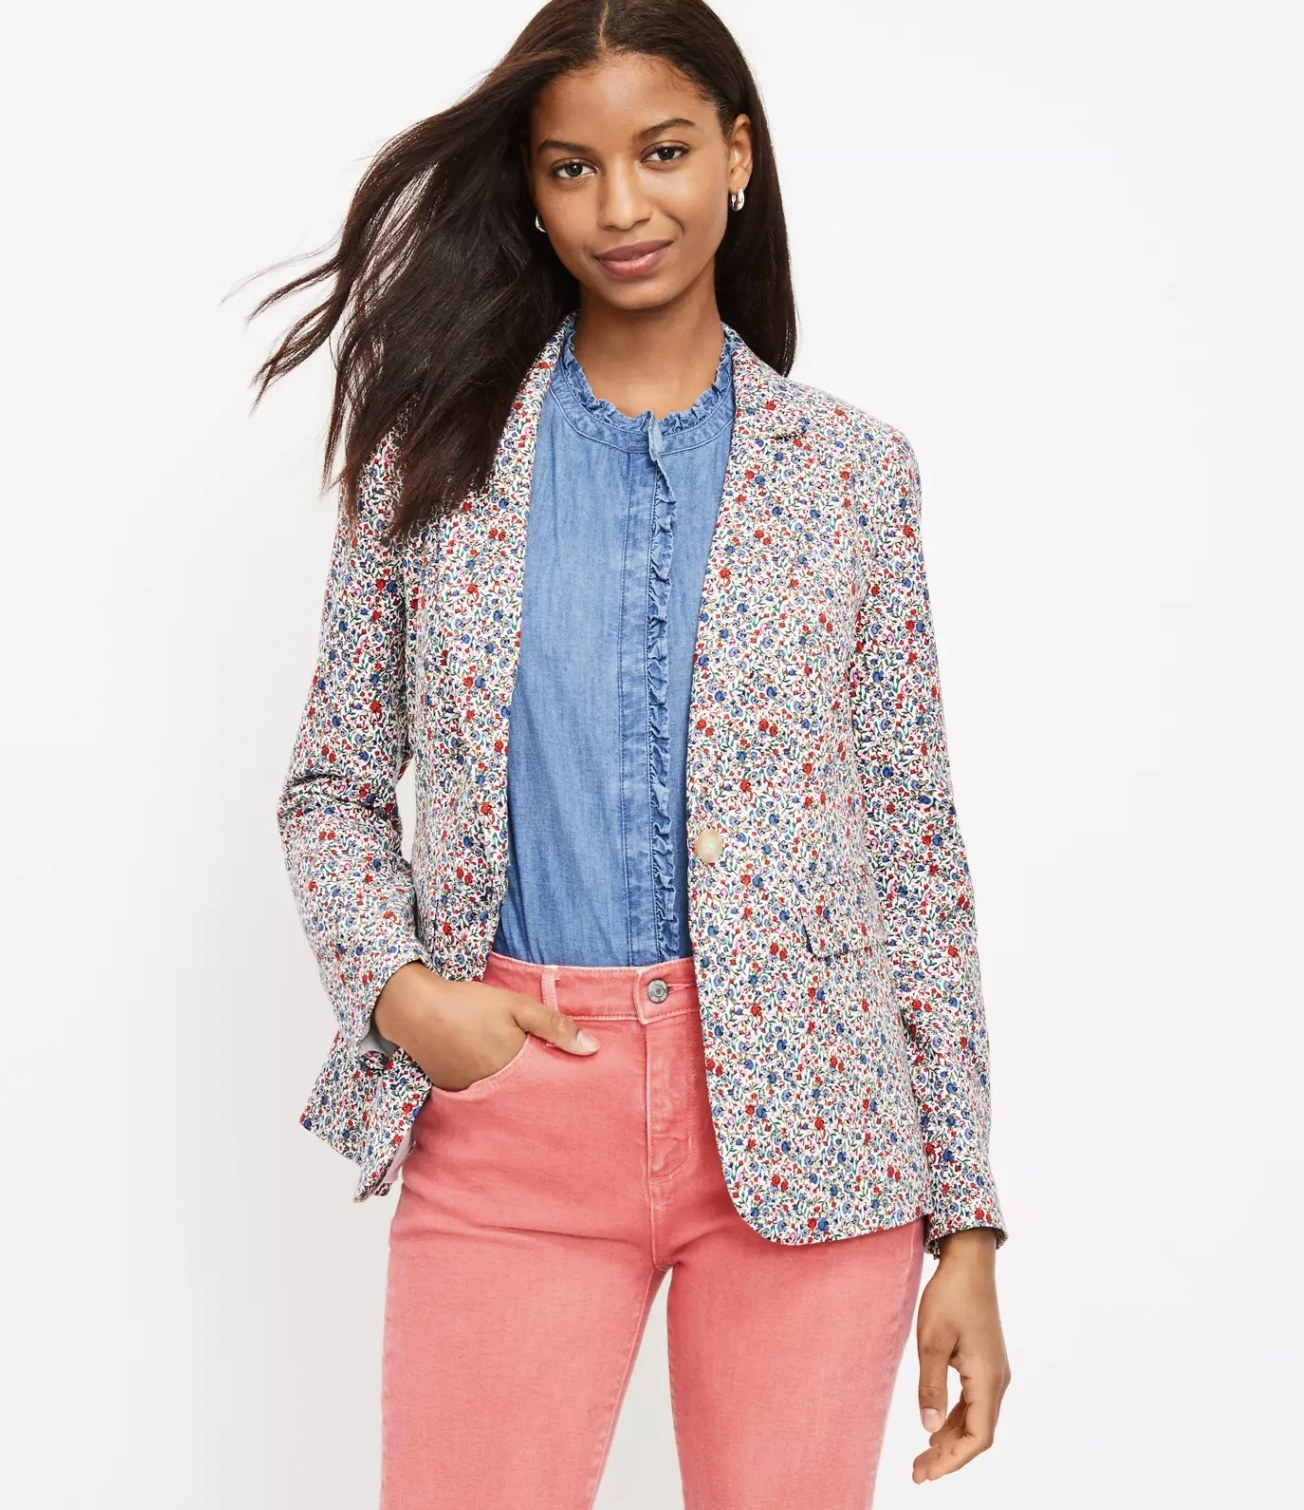 Model wearing the blazer over blue denim blouse tucked into pink coral pants